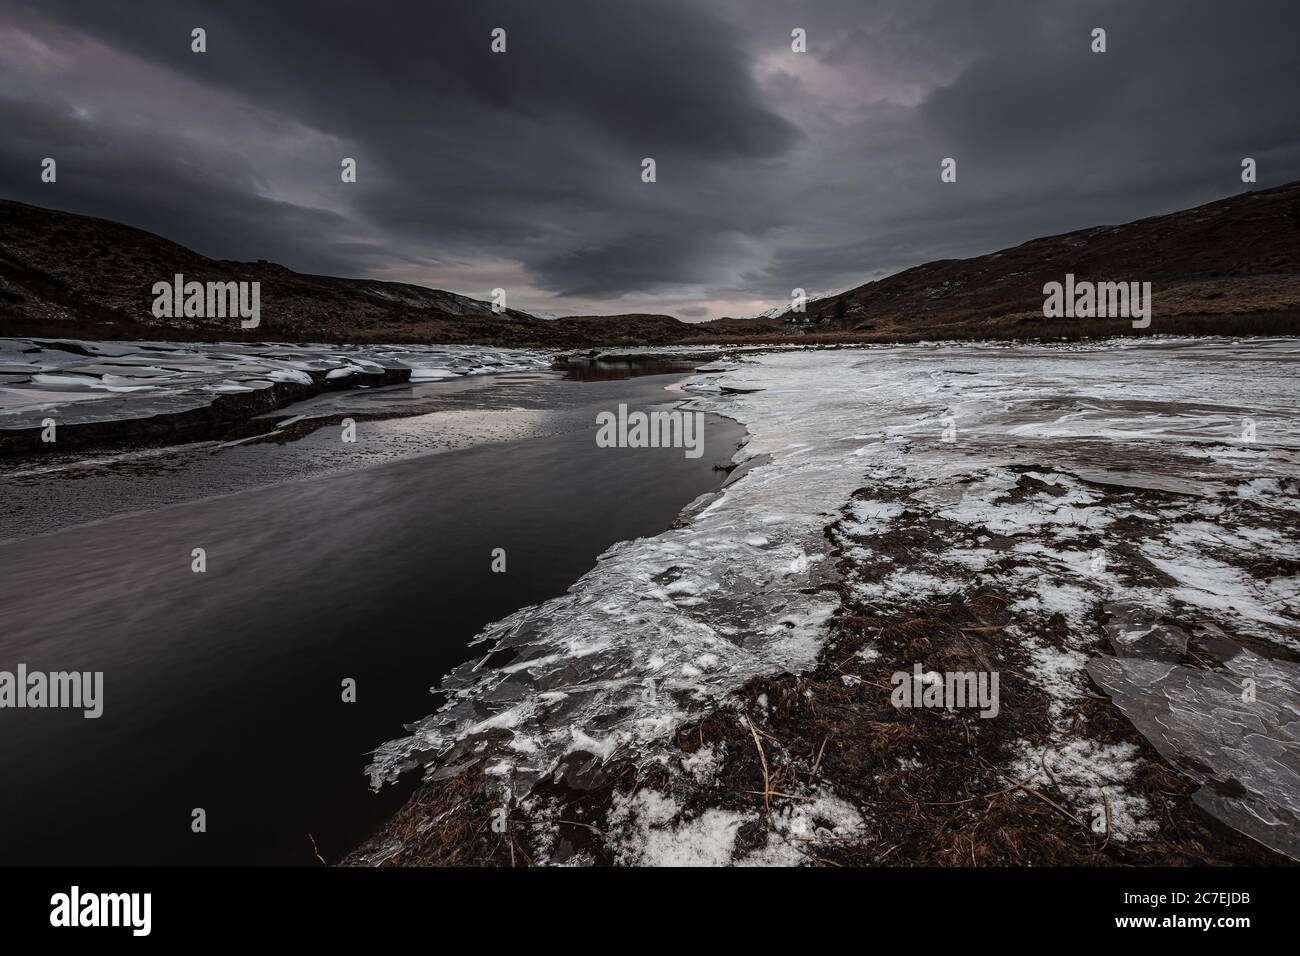 Beautiful shot of frosted surfaces by the water surrounded by mountains under a gray cloudy sky Stock Photo